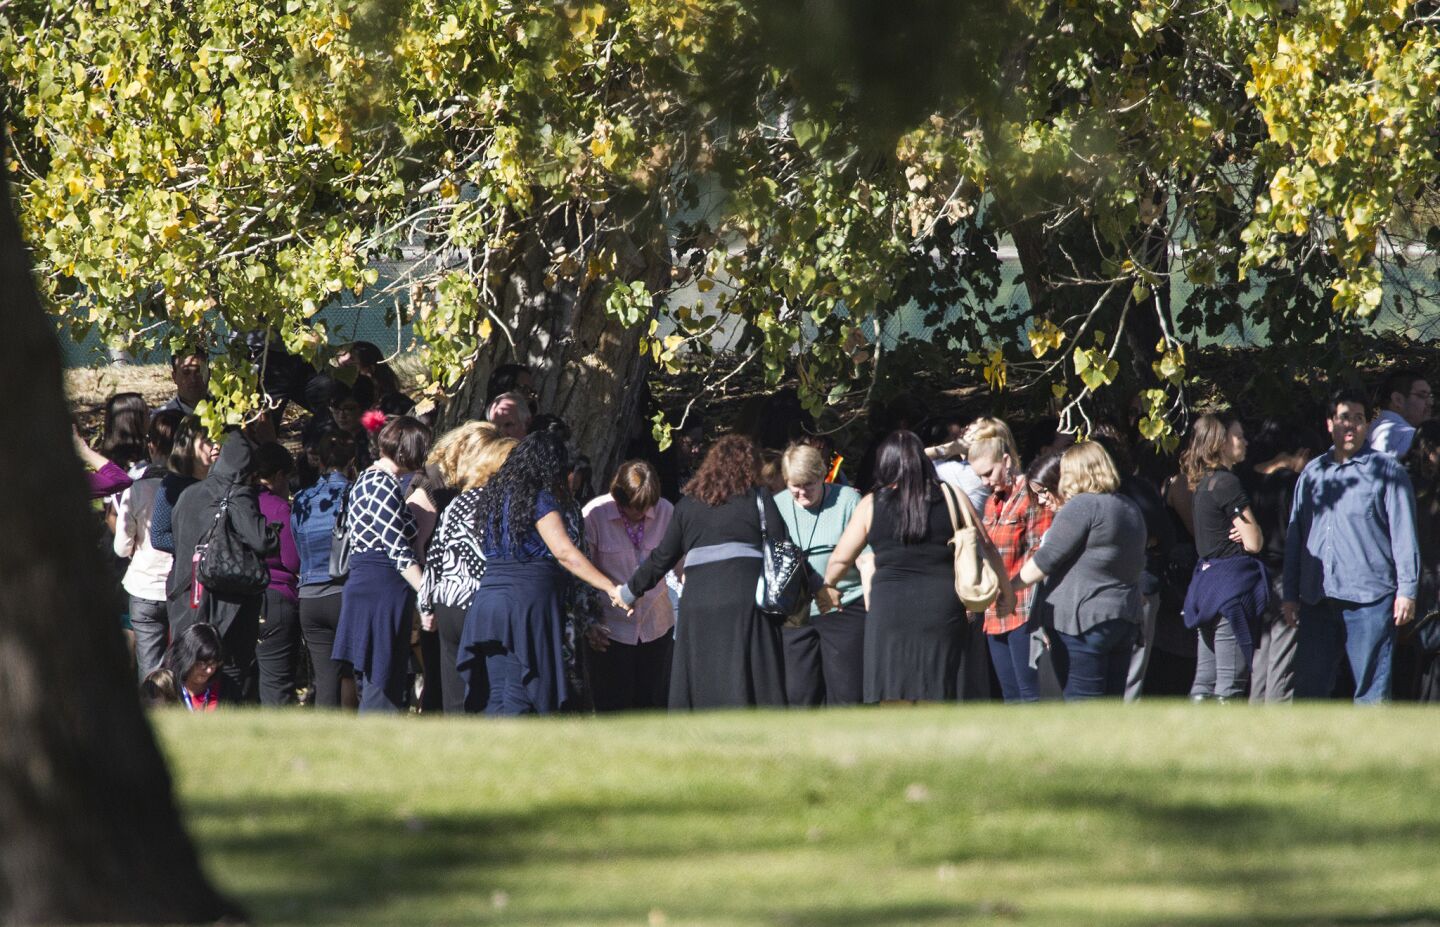 Evacuated workers join in a circle to pray on the San Bernardino Golf Course across the street from where a shooting occurred at the Inland Regional Center.